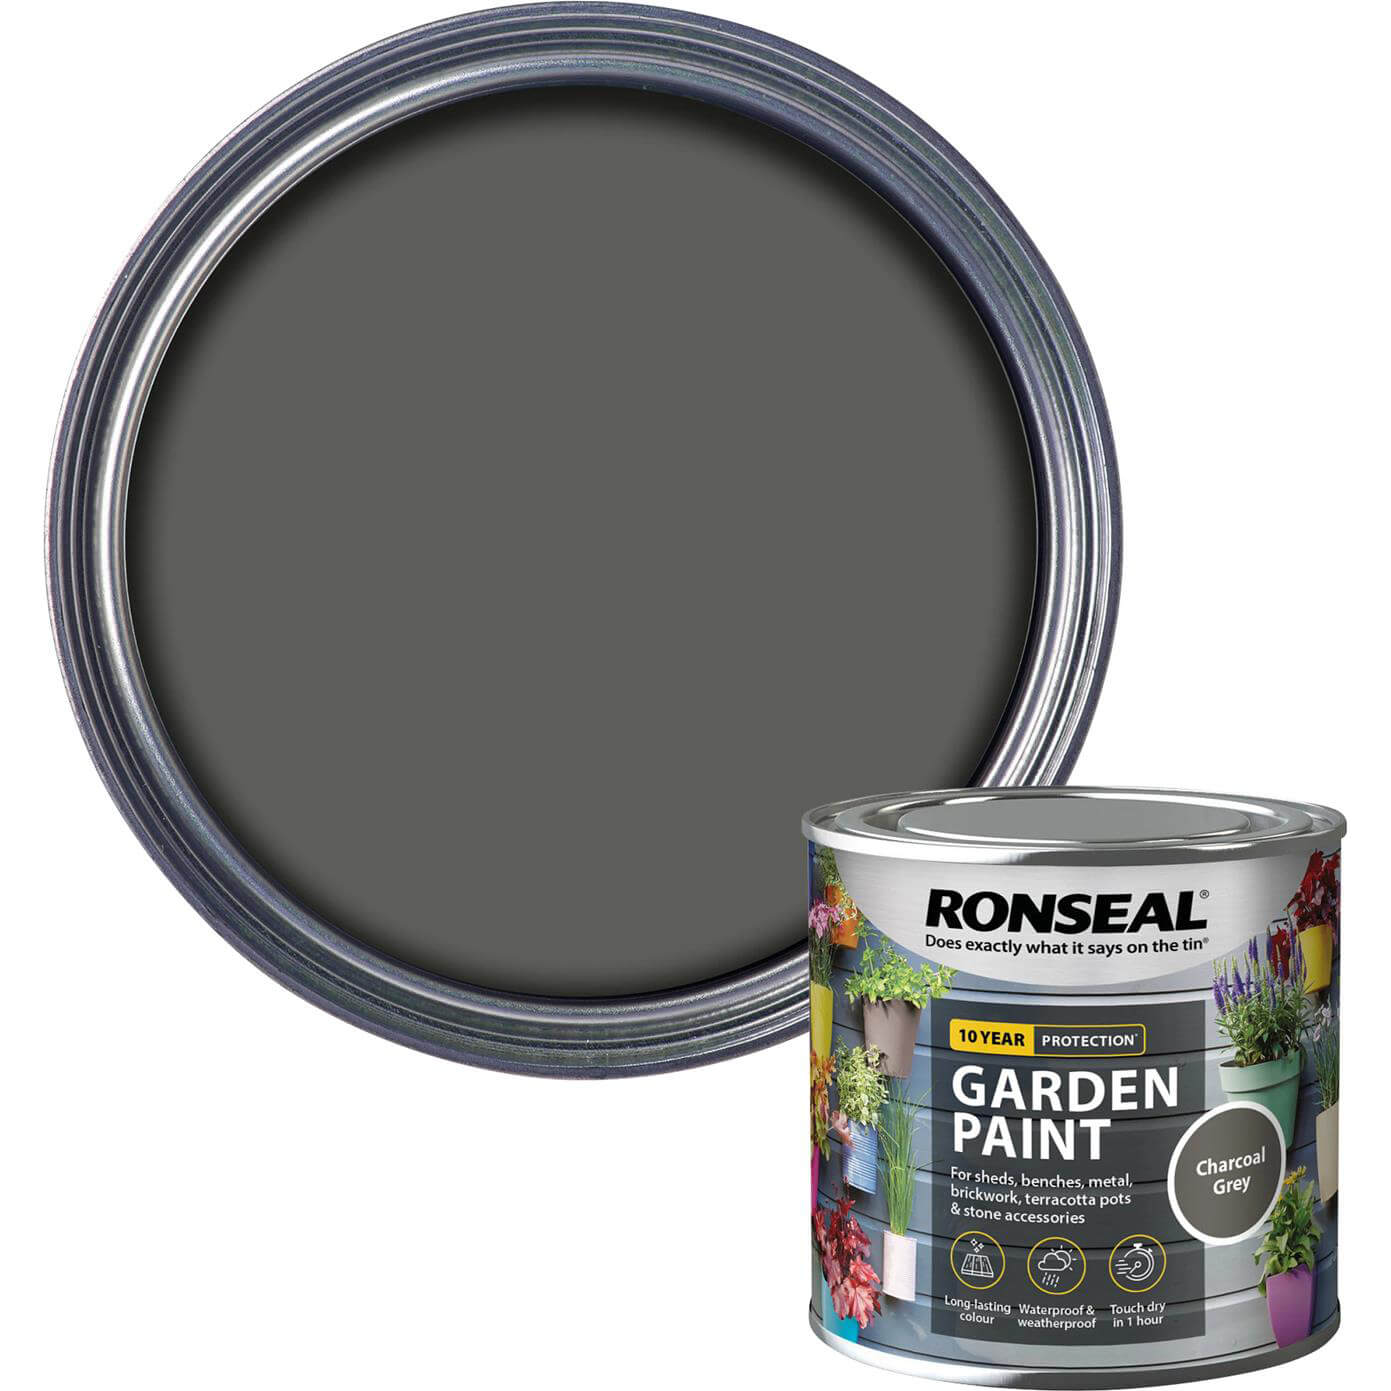 Image of Ronseal General Purpose Garden Paint Charcoal 250ml